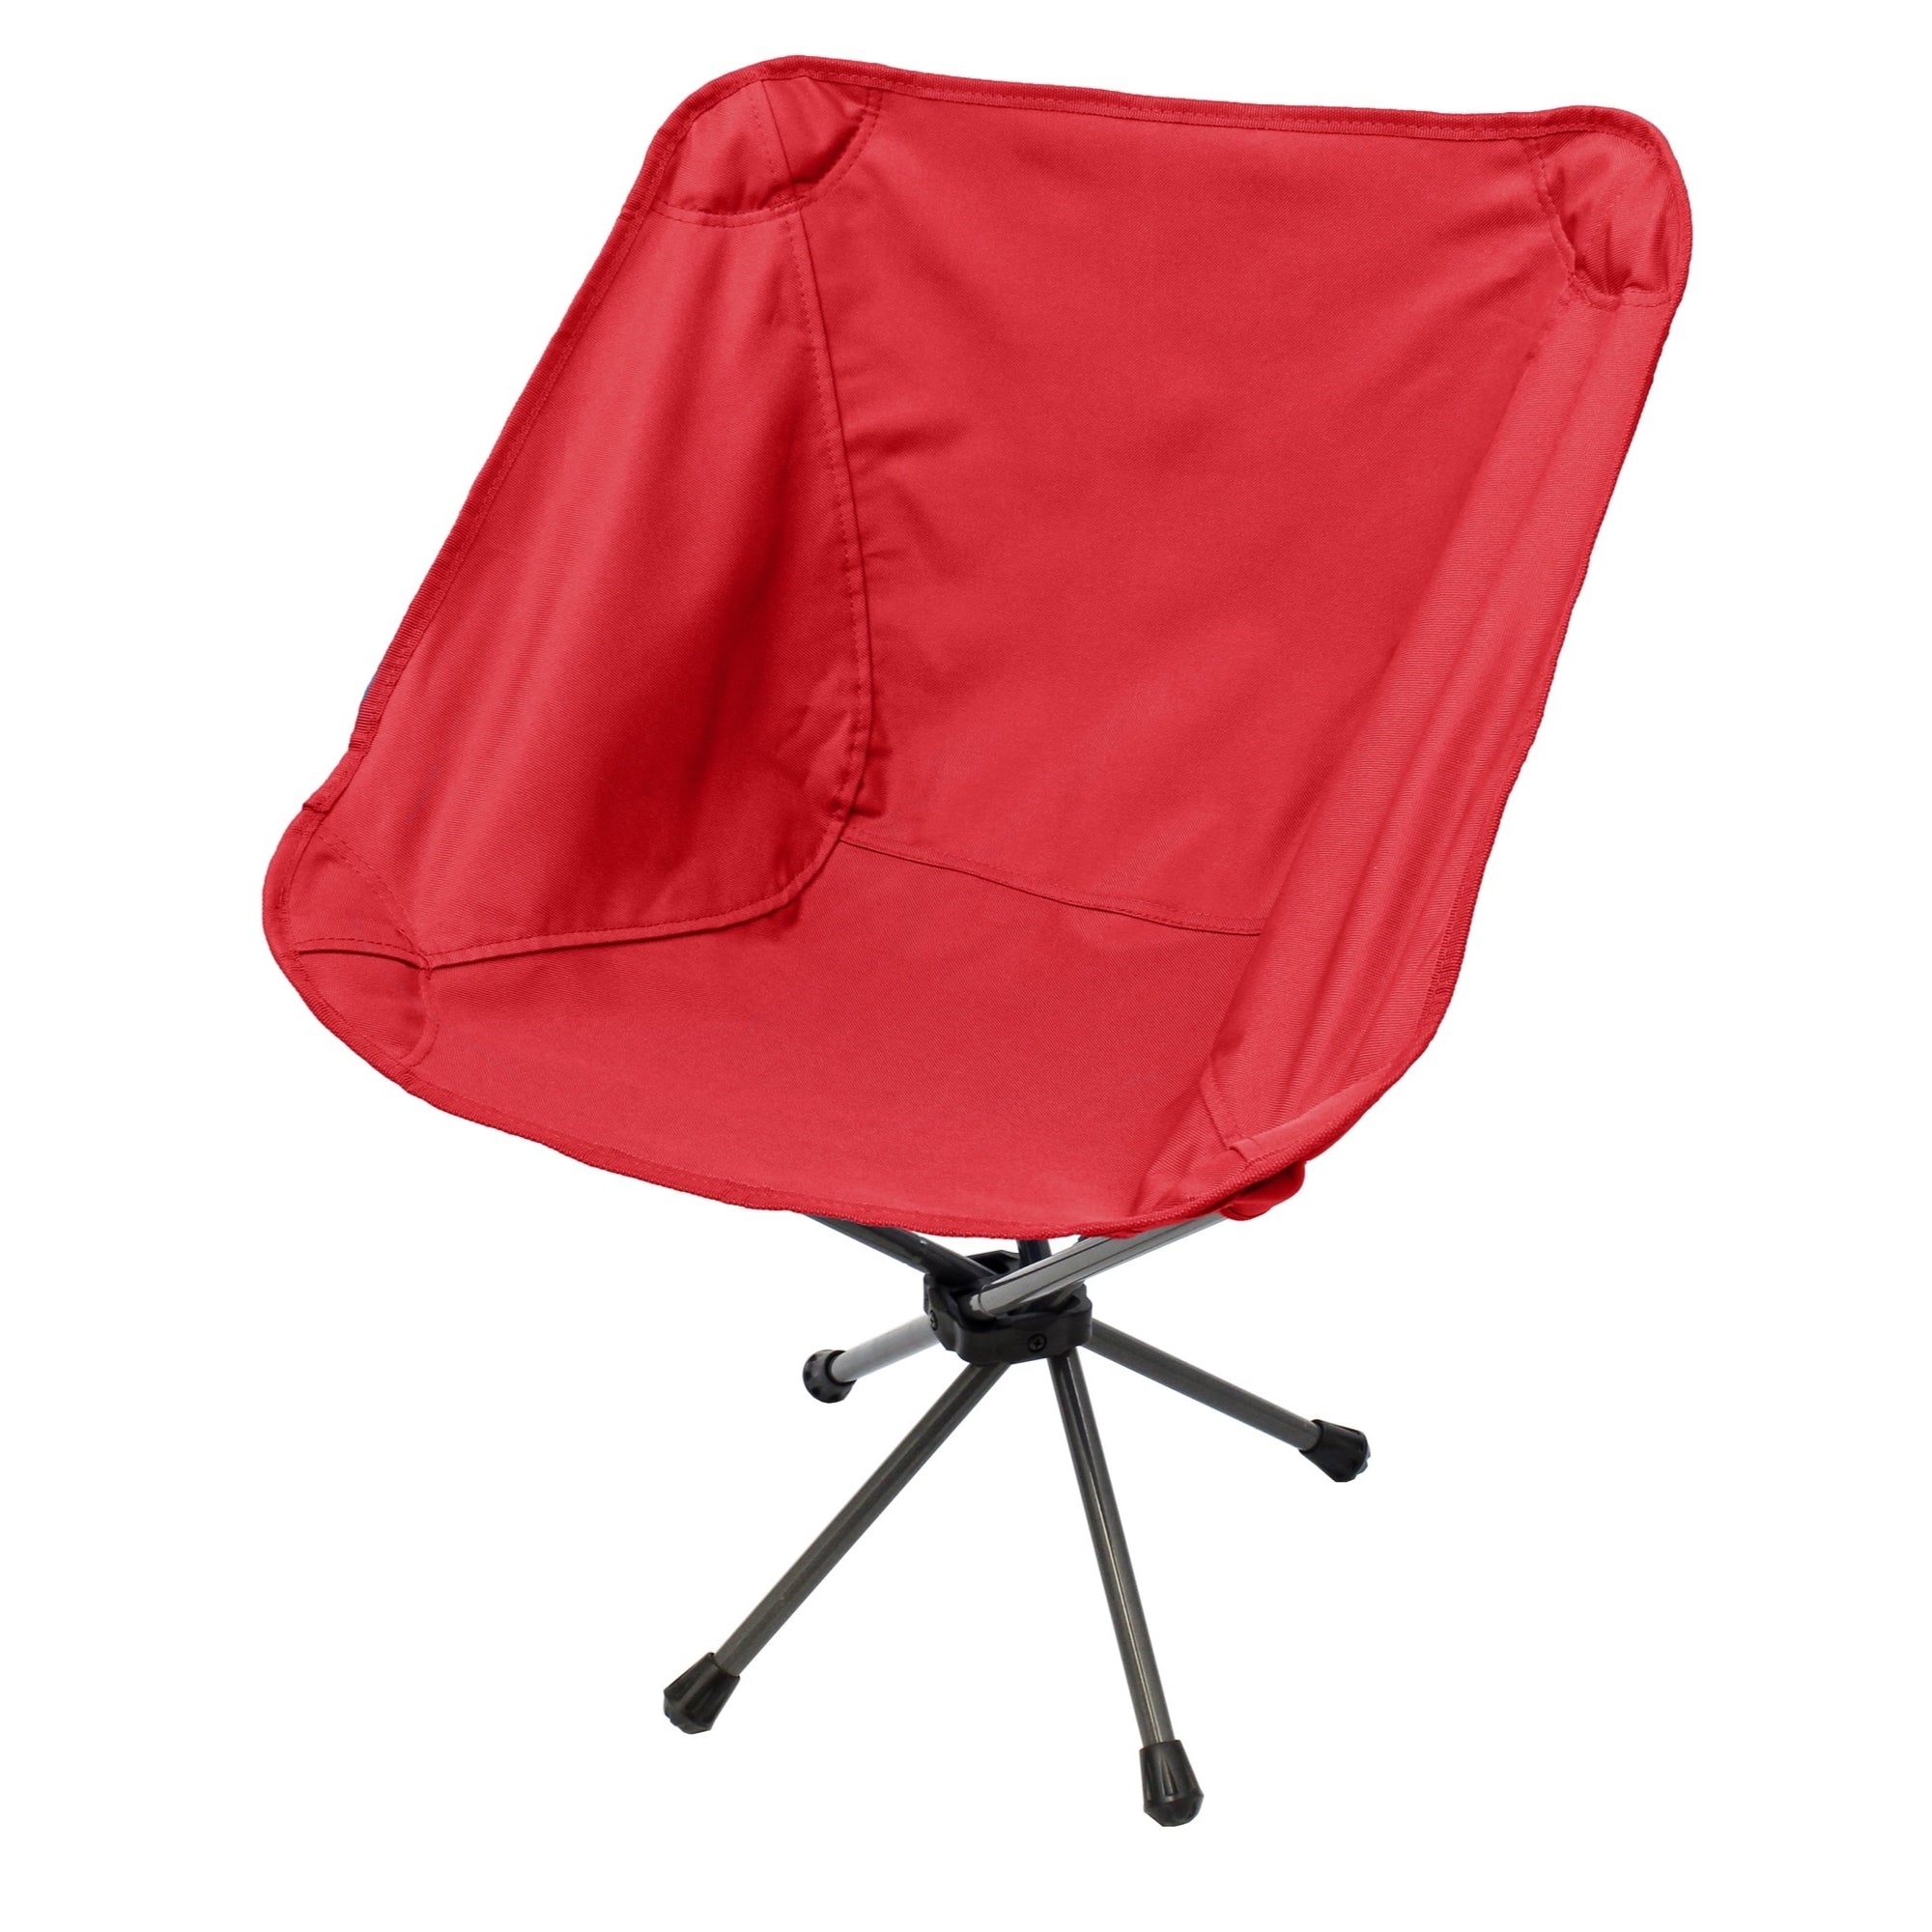 Four Seasons Courtyard Red Compact Chair